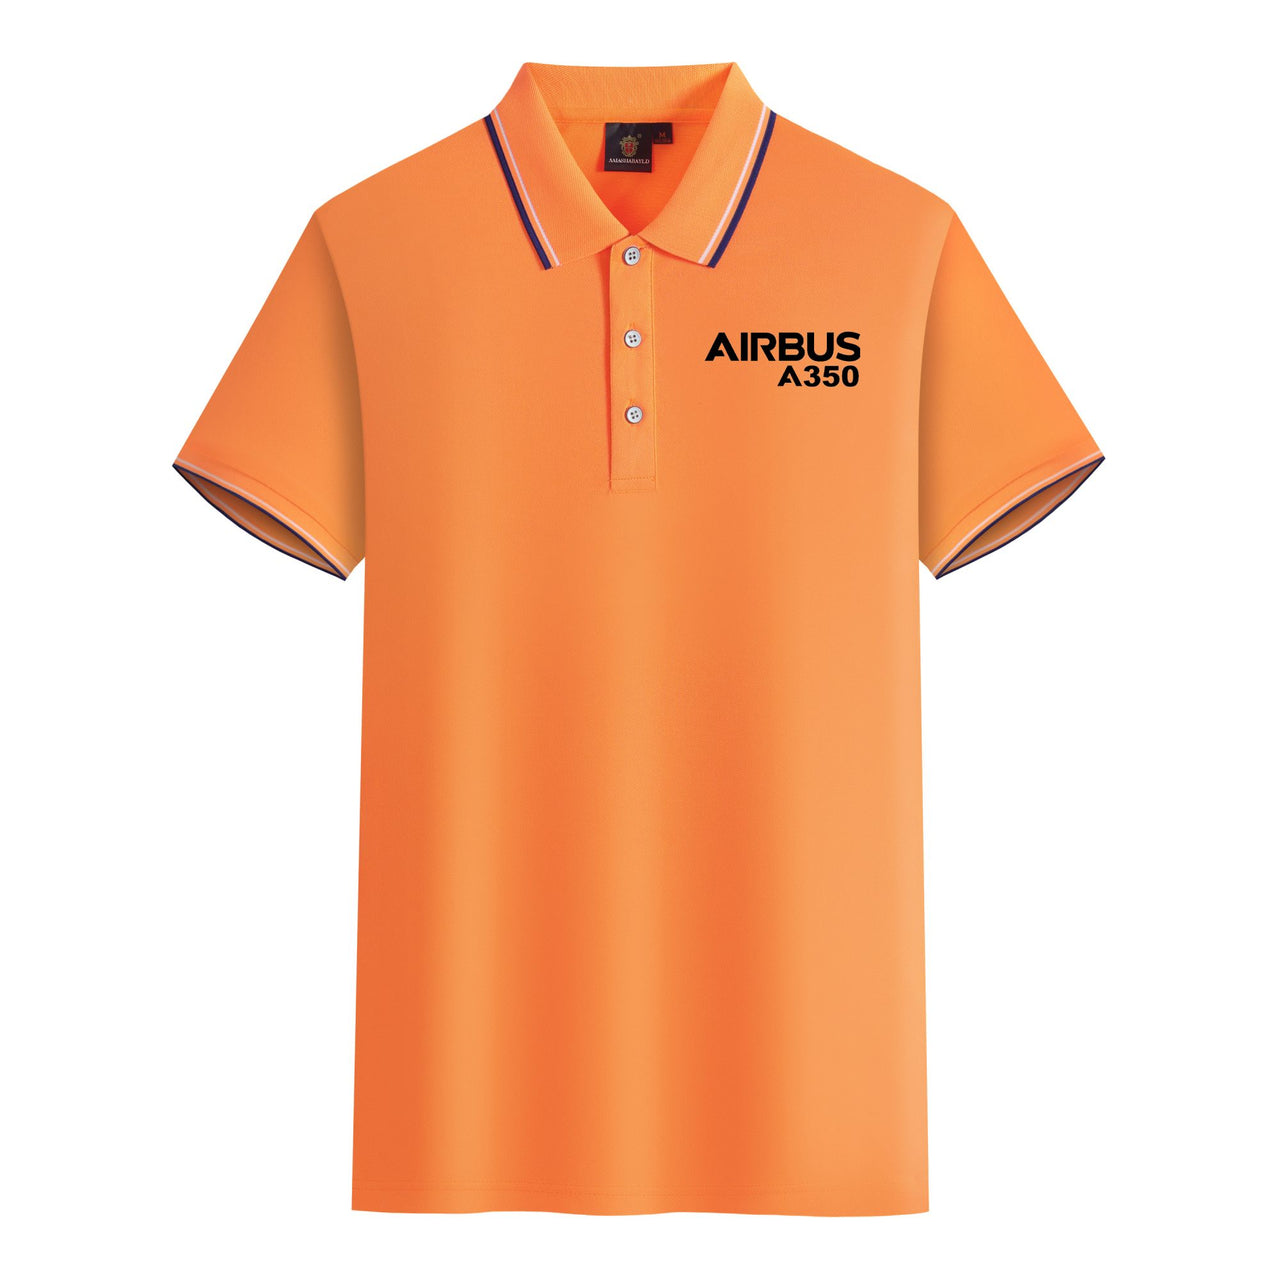 Airbus A350 & Text Designed Stylish Polo T-Shirts